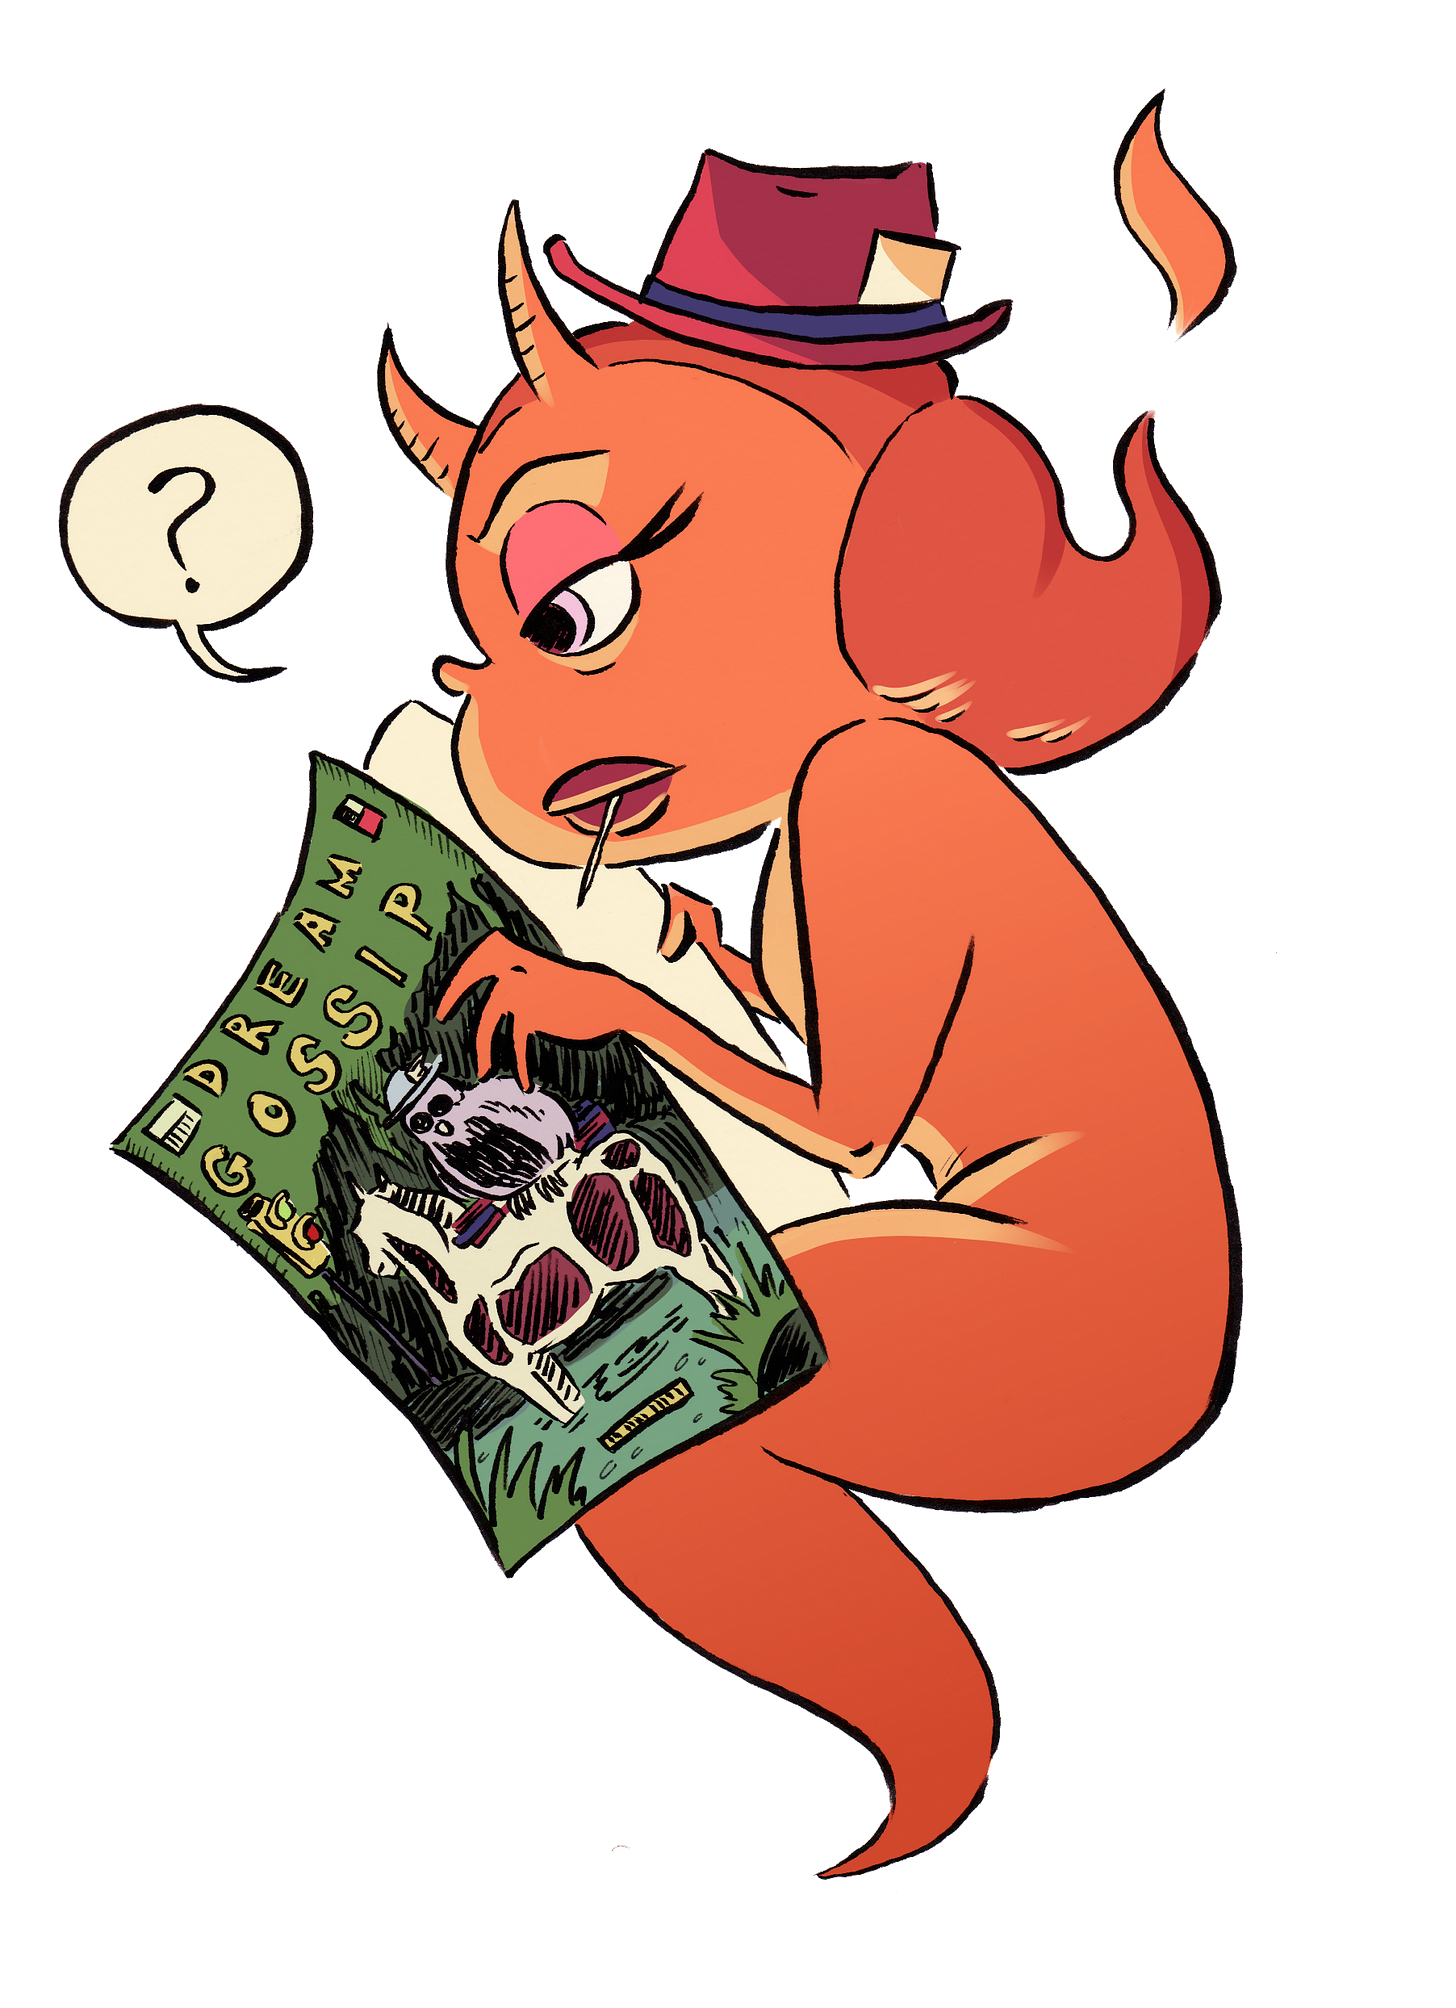 Evie, a cute girly devil with a hat and a toothpick in her mouth, reads a gossip magazine. There's a speech bubble next to her with a question mark.